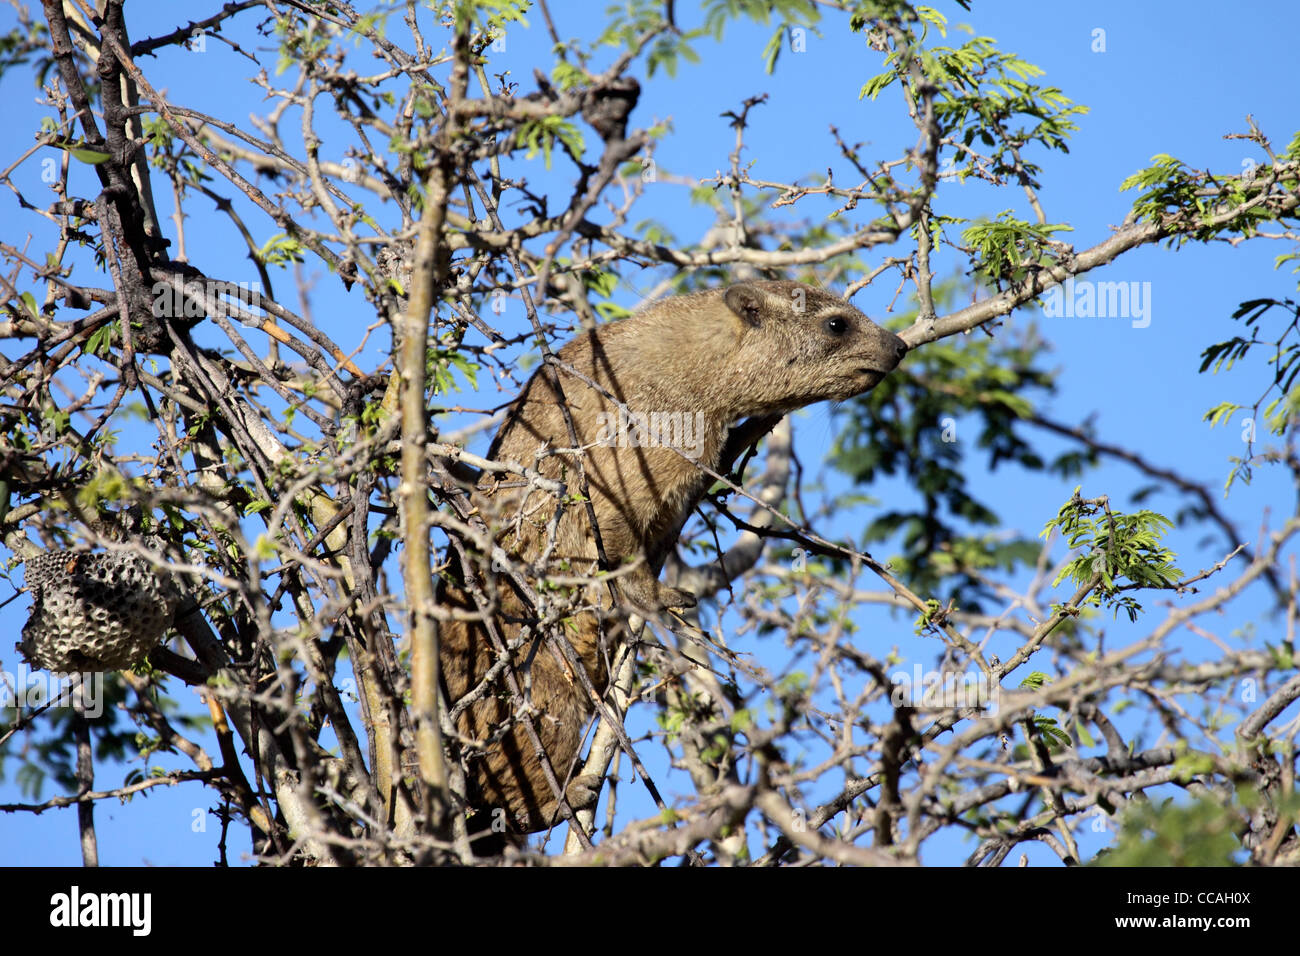 Rock dassie or hyrax in tree Stock Photo